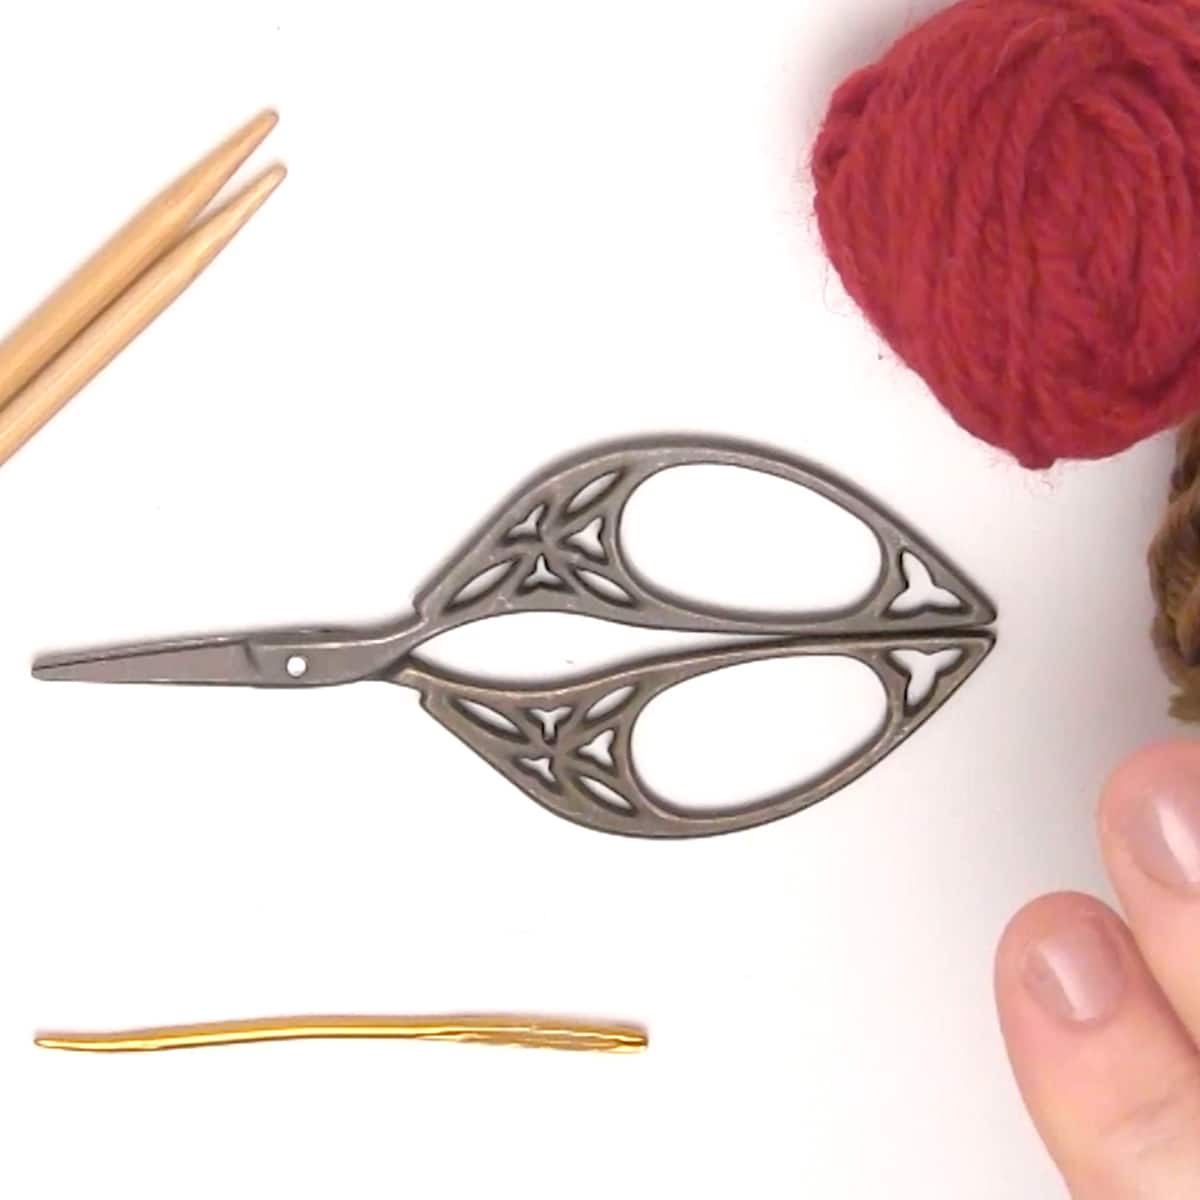 Knitting materials for acorns with yarn, needles, tapestry needle, and scissors.